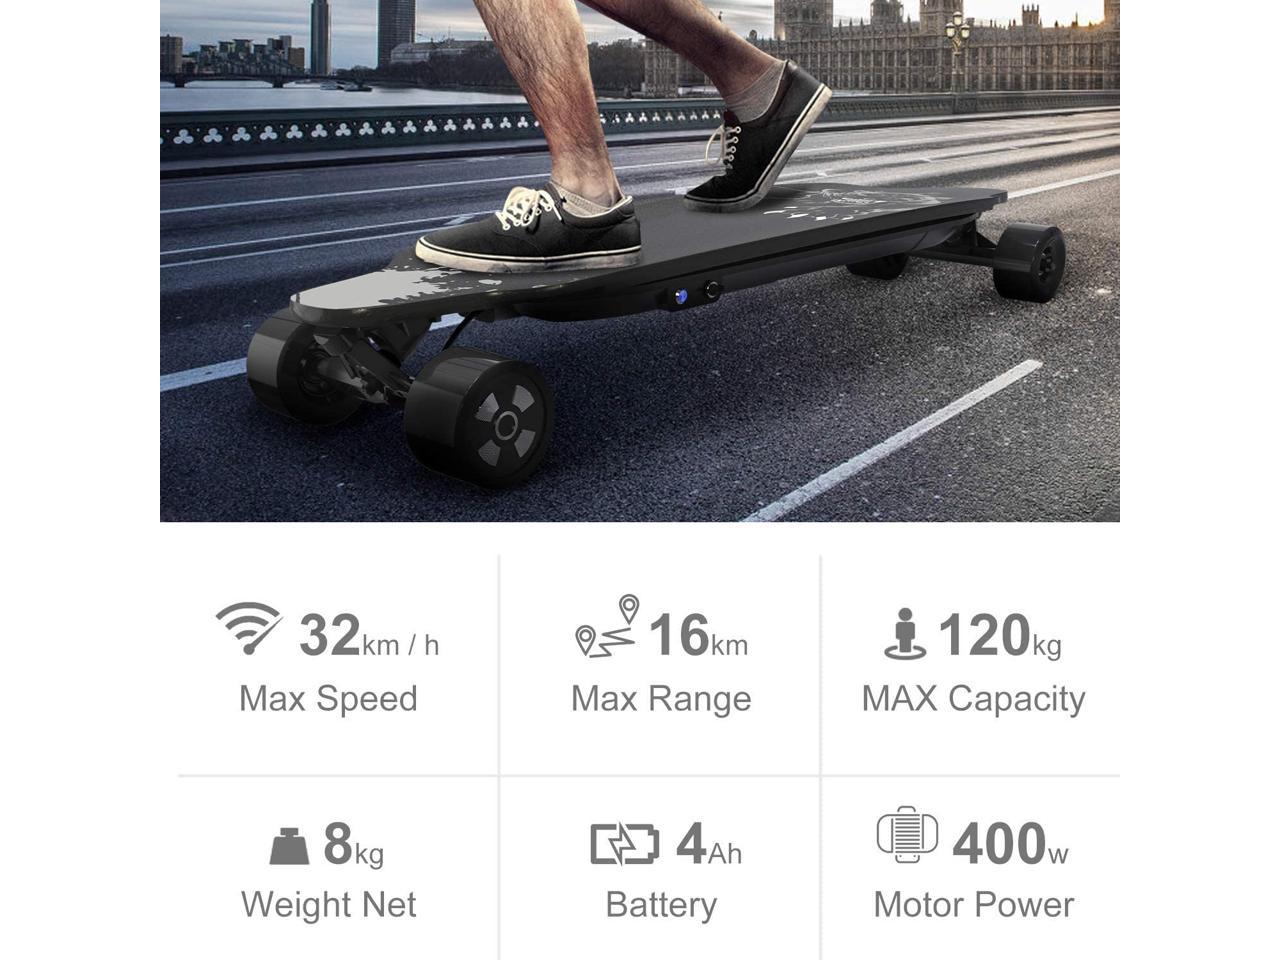 10 Miles Range 400W Brushless Motor Longboard 11 Layers Maple Longboard 3 Speed Adjustment Load up to 265 Lbs URBANPRO Electric Skateboard with Remote Control 20 MPH Top Speed 